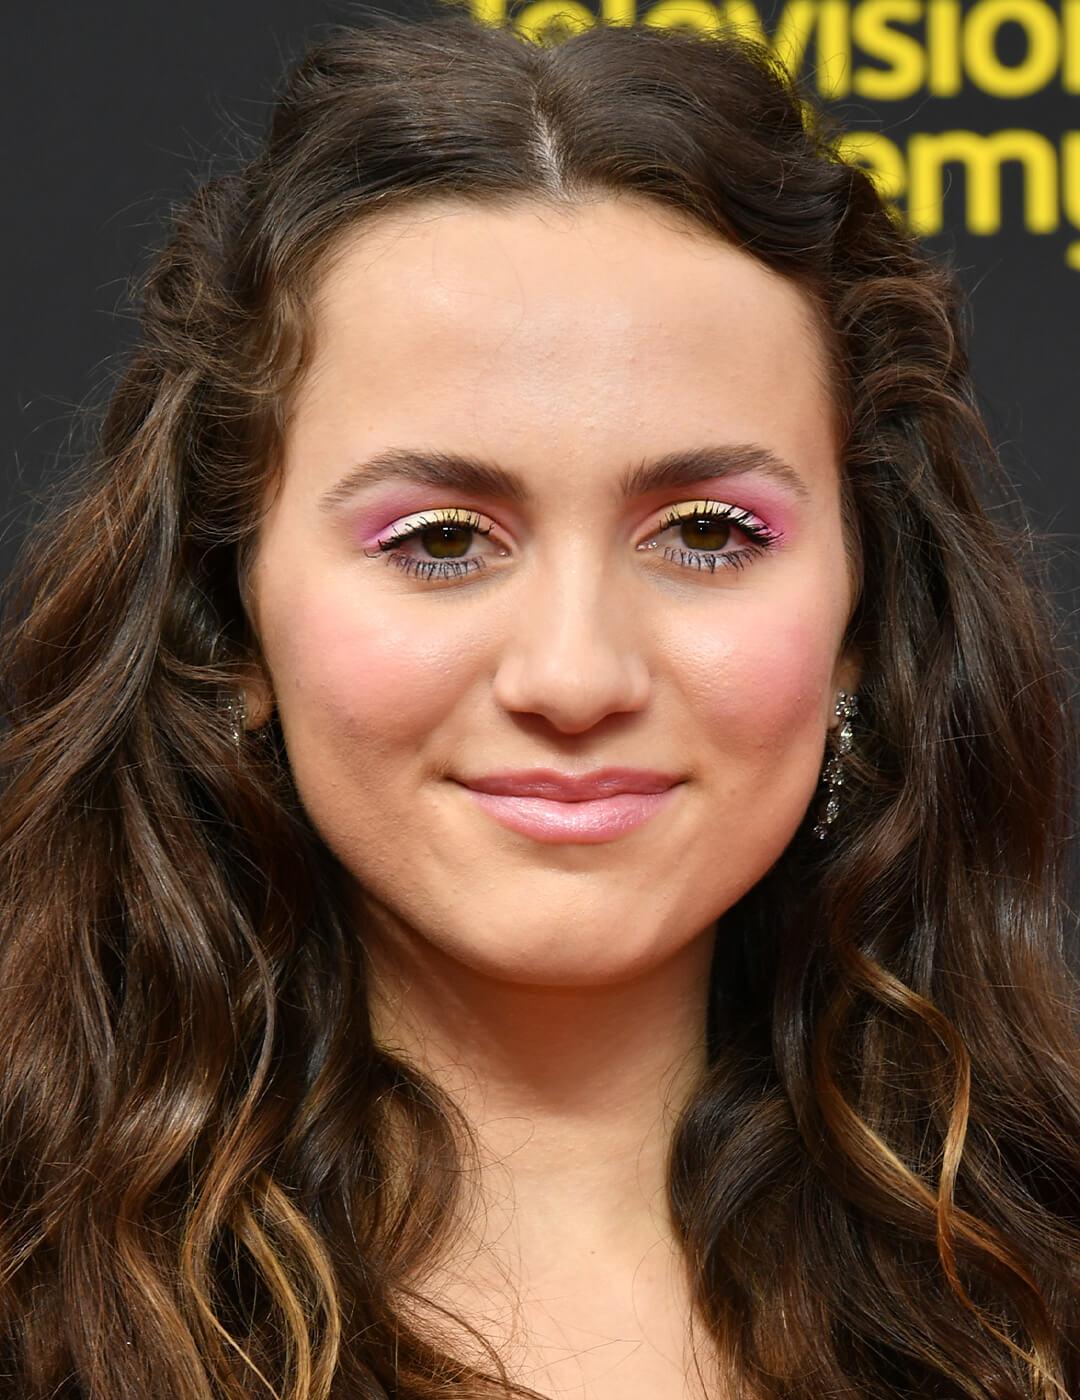 Maude Apatow rocking a pink and gold eye shadow makeup look